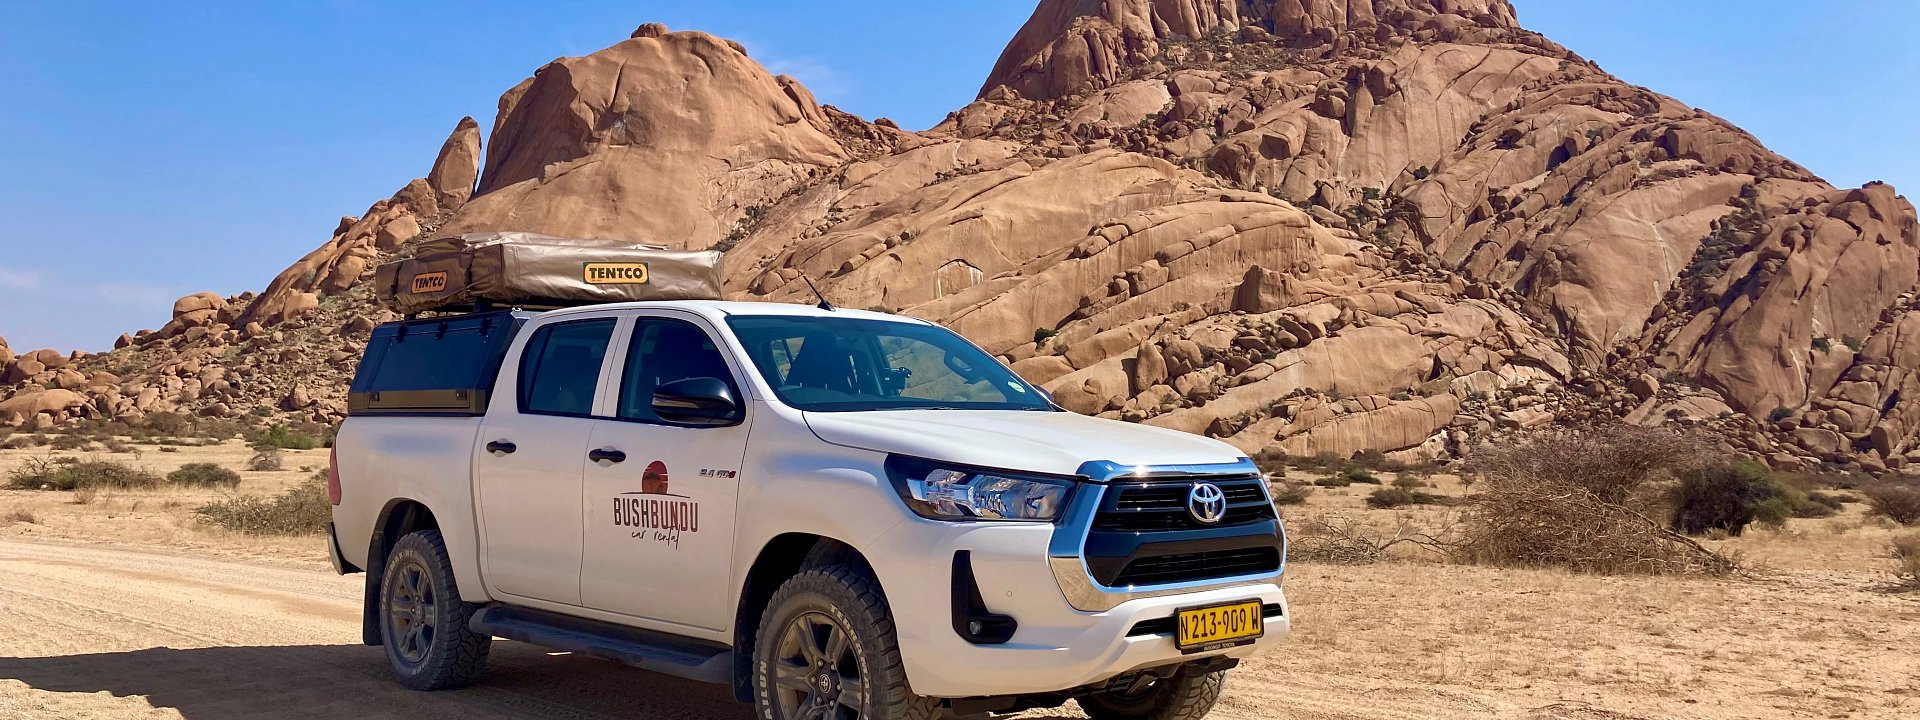 bushbundu-car-rental-windhoek-namibia-home-page-image-of-fully-equipped-with-camping-equipment-4x4-toyota-hilux-in-the-desert-front-view